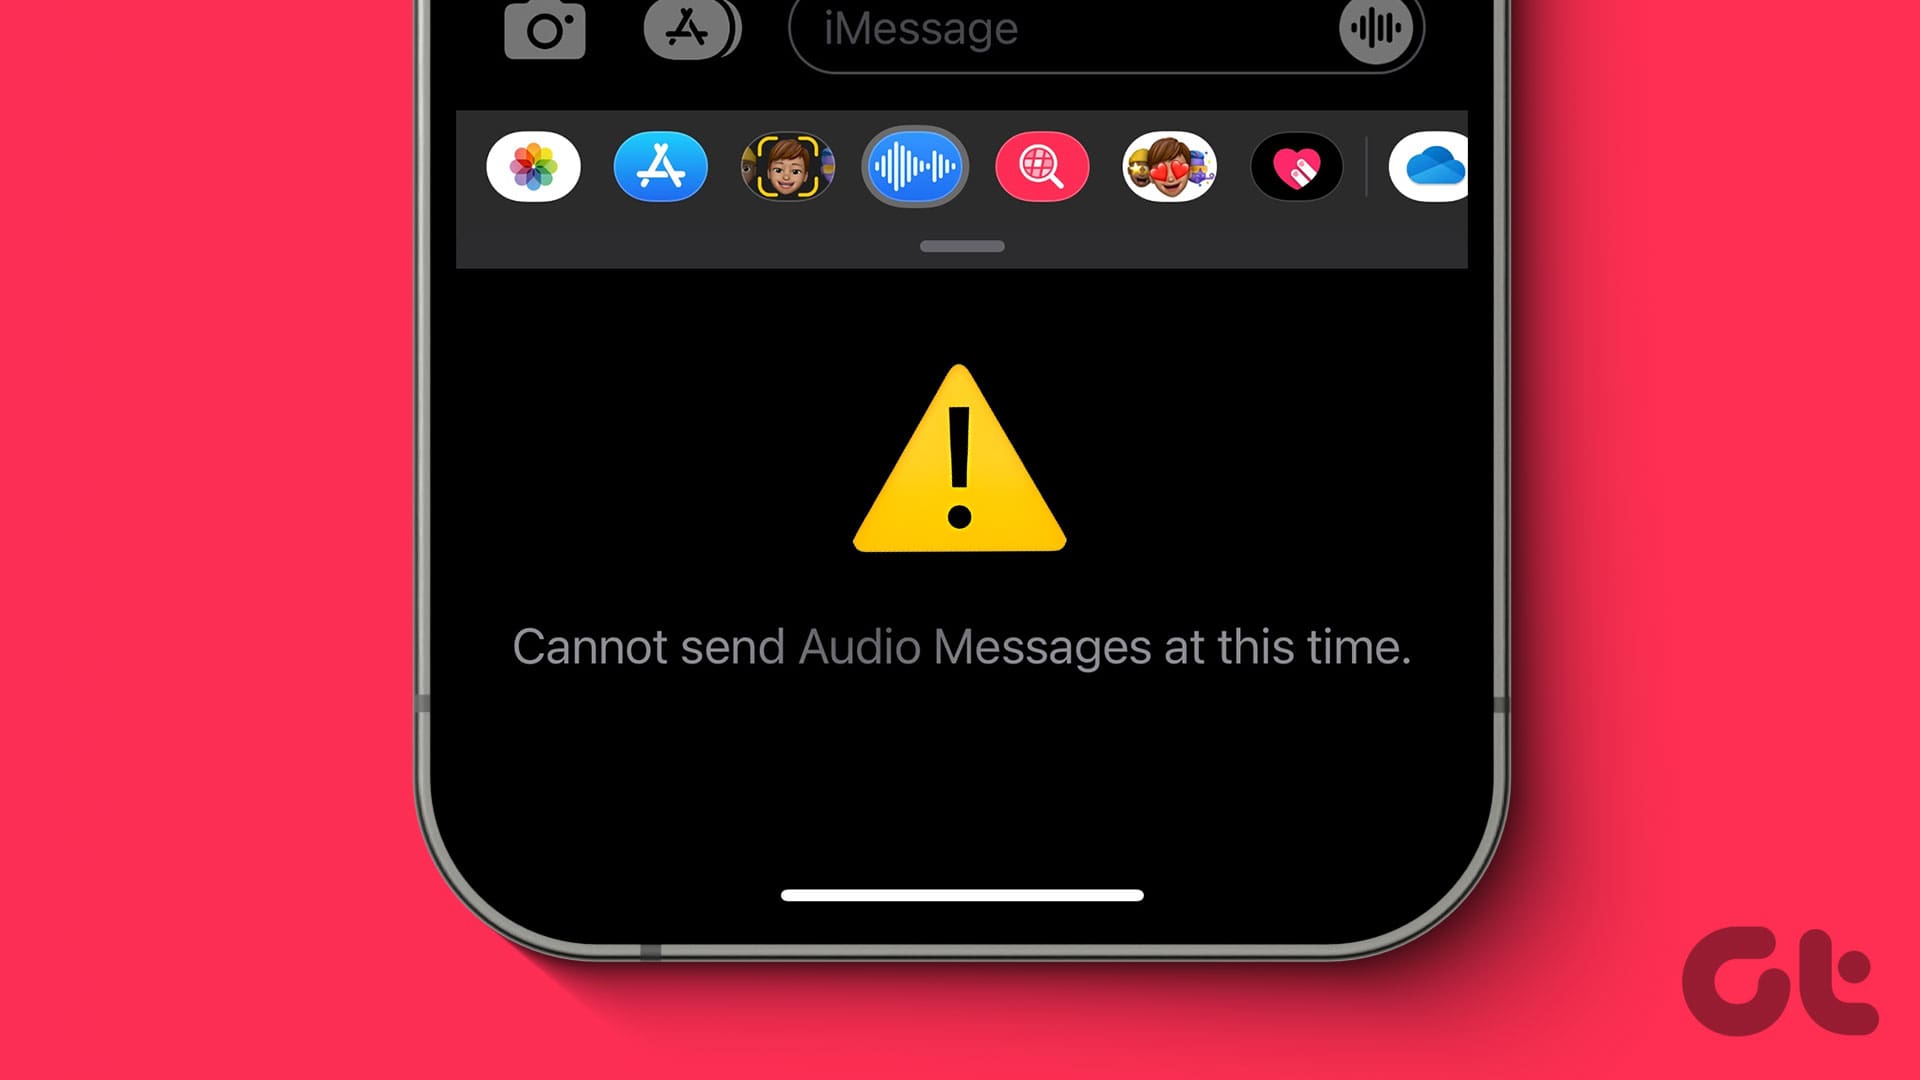 7_Best_Fixes_for_Cannot_Send_Audio_Message_At_This_Time_Error_on_iPhone